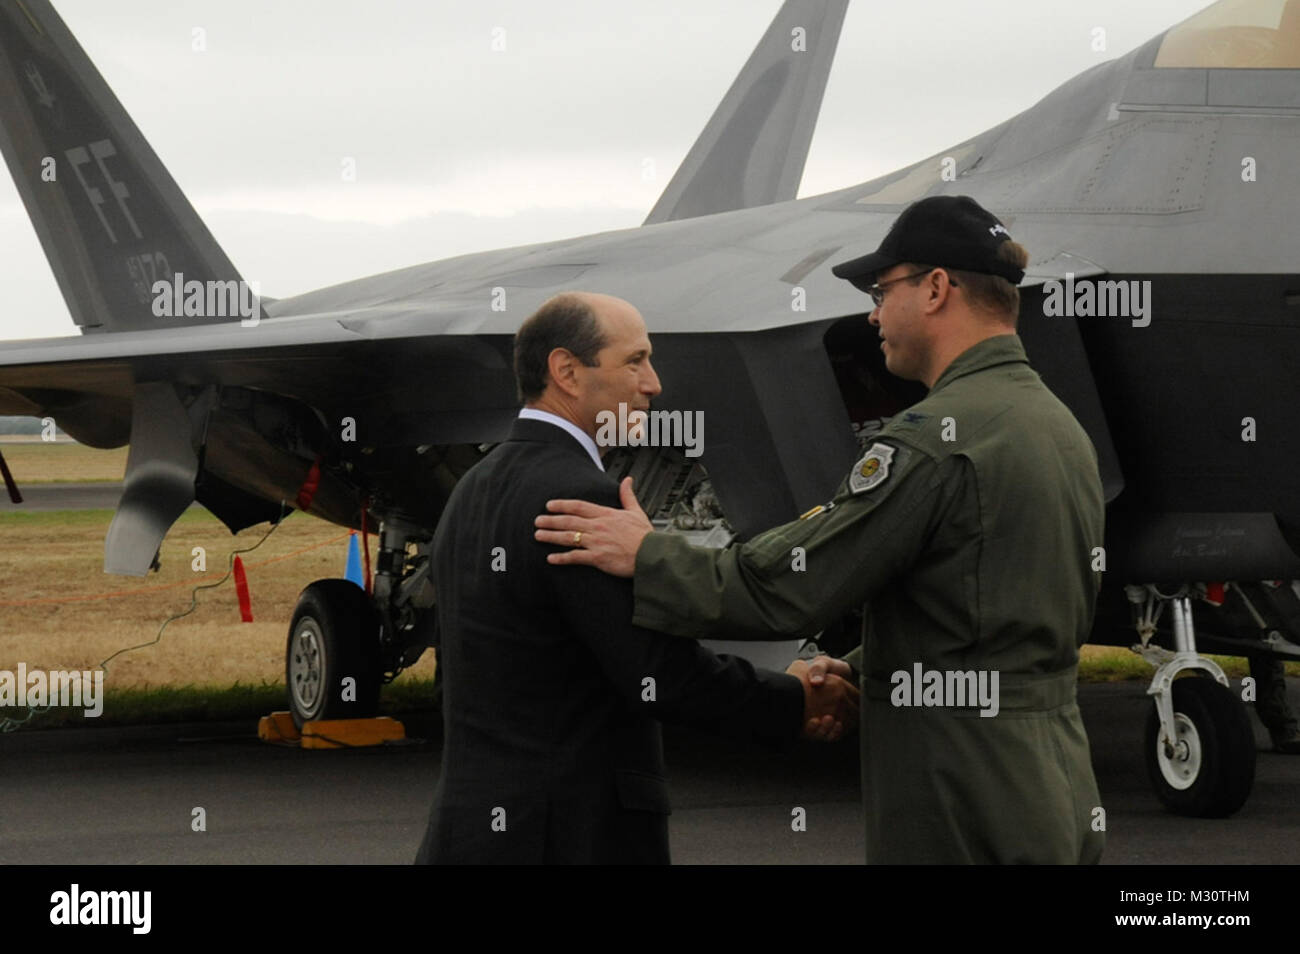 U.S. Air Force Col. Stephen Williams, Misawa Air Base, Japan, wing commander, shakes hands with Jeffrey Bleich, Australian ambassador, as Bleich departs the Australian International Airshow 2013 at Avalon, Australia, Feb. 27, 2013. This marks the second day of the AIA13 at the Avalon Airport. This event features 500 exhibitors from 35 countries and is designed to bolster business opportunities and international aviation sector. U.S. participation in the AIA13 directly supports theater engagements, goals and objectives and further enhances relationships with other Pacific nations. (U.S. Air For Stock Photo